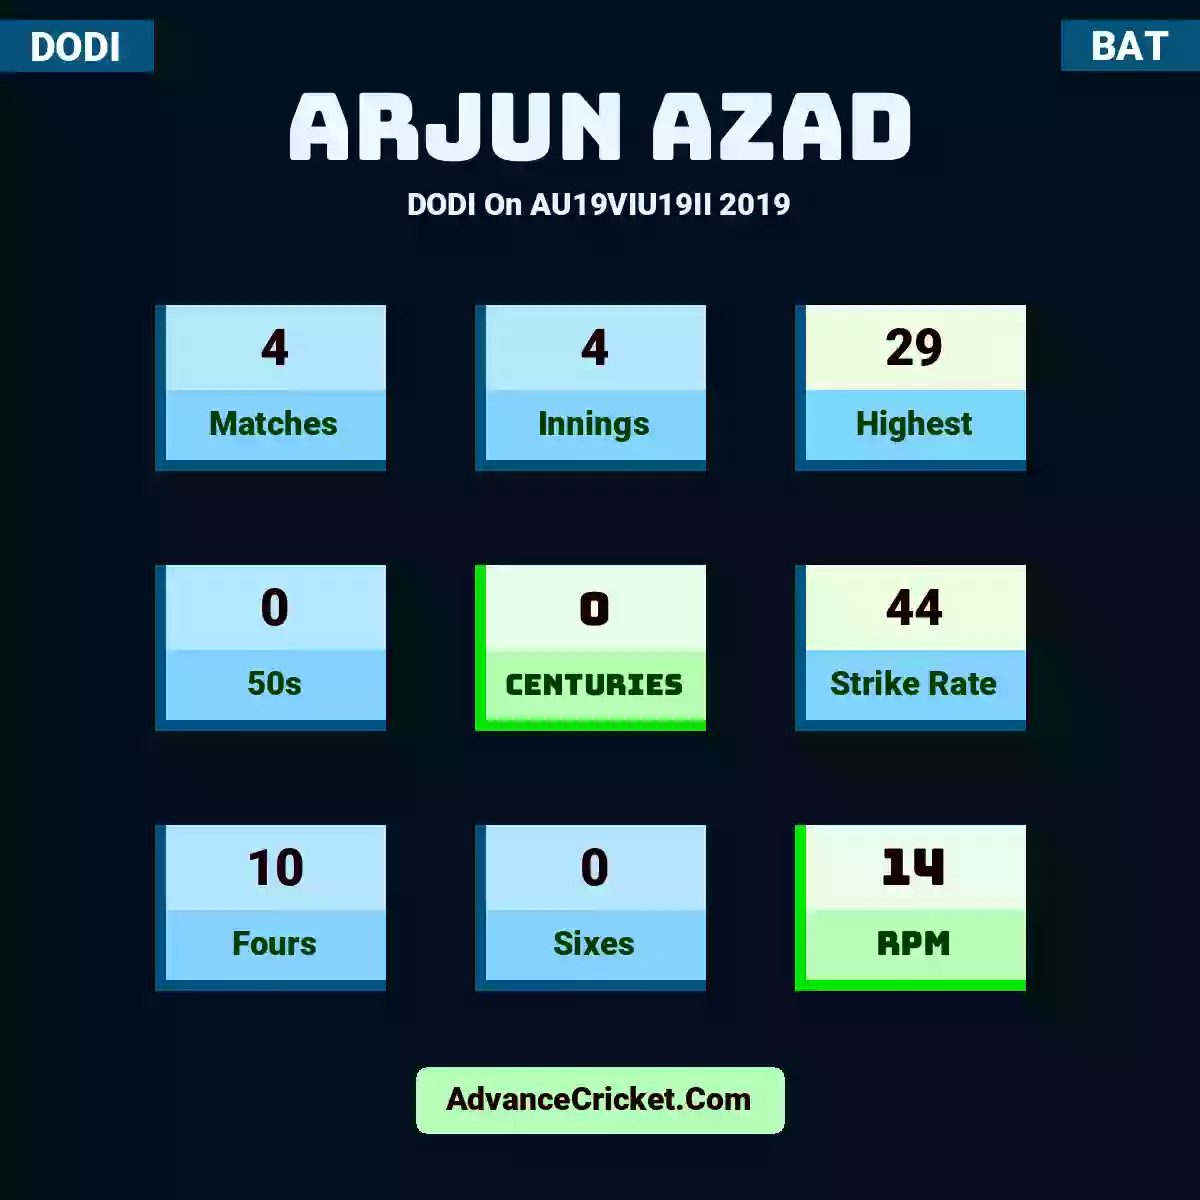 Arjun Azad DODI  On AU19VIU19II 2019, Arjun Azad played 4 matches, scored 29 runs as highest, 0 half-centuries, and 0 centuries, with a strike rate of 44. A.Azad hit 10 fours and 0 sixes, with an RPM of 14.